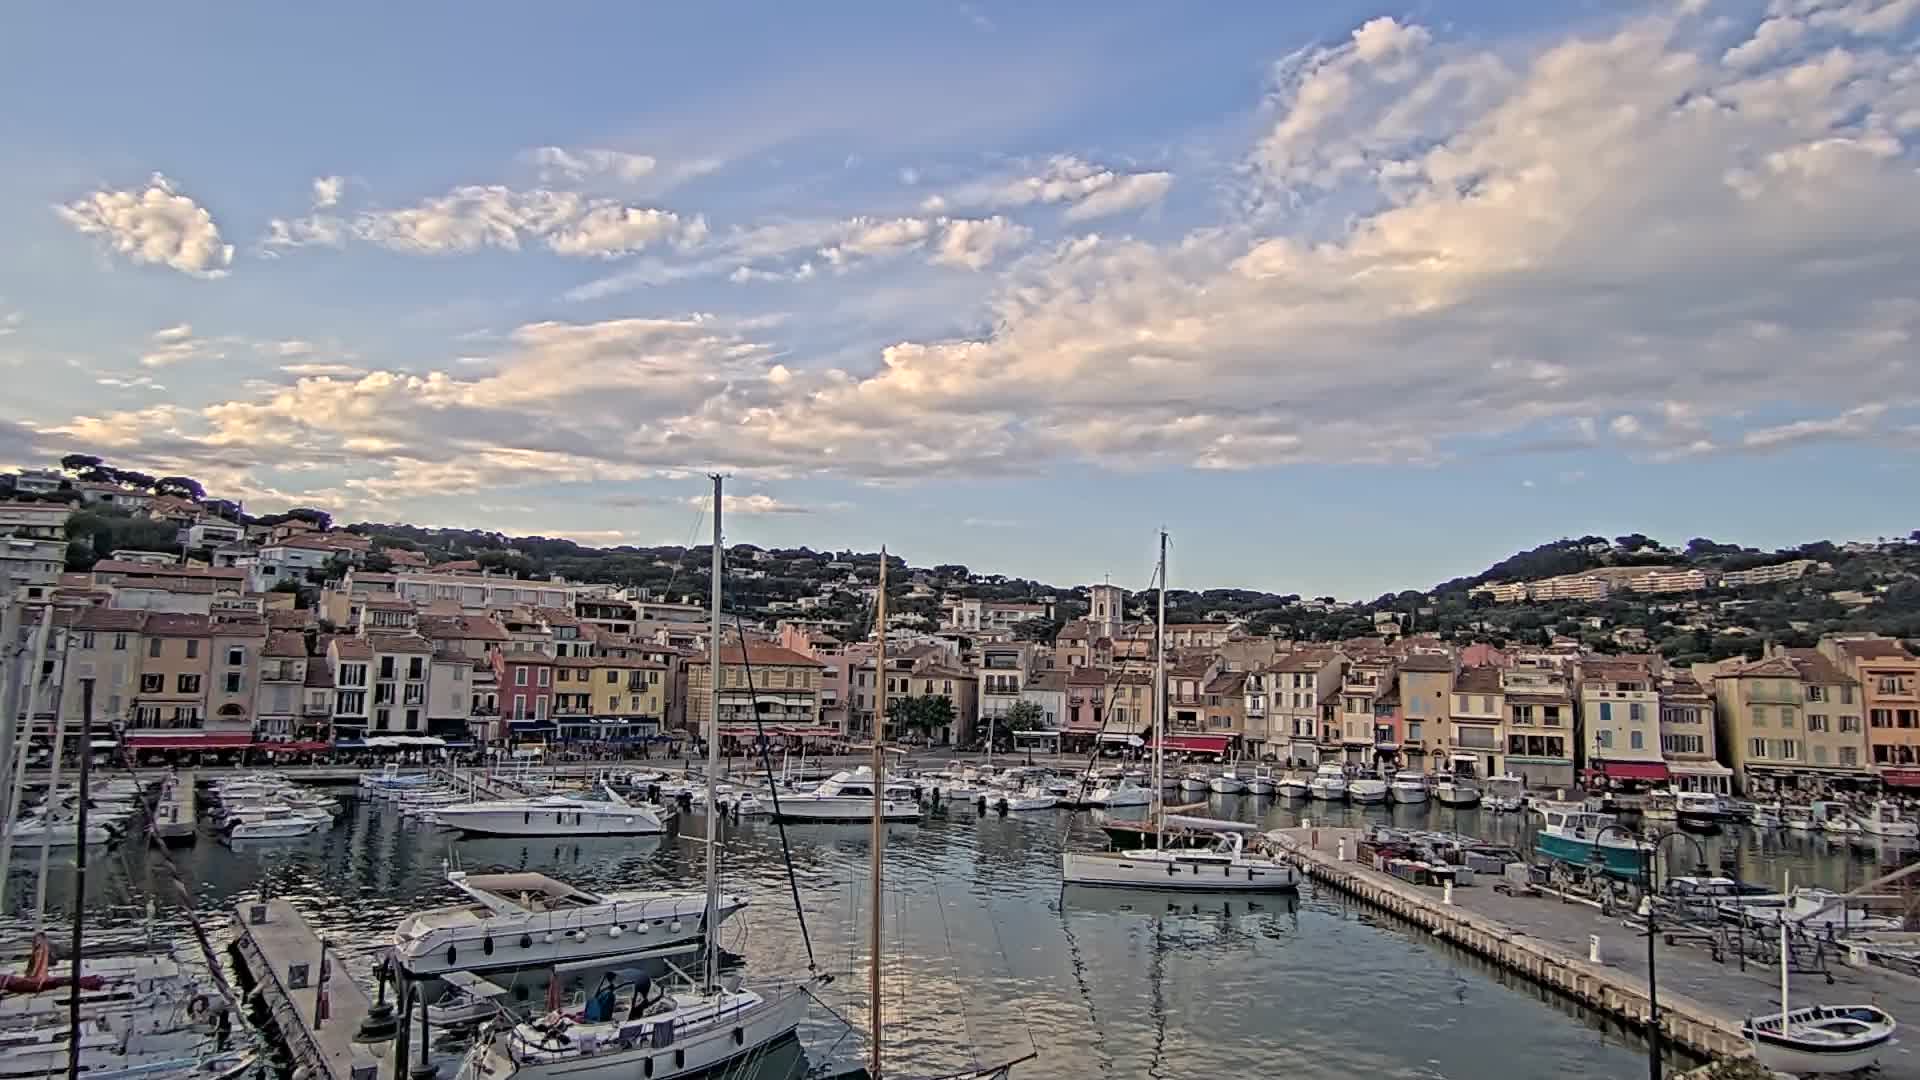 Cassis Wed. 19:33